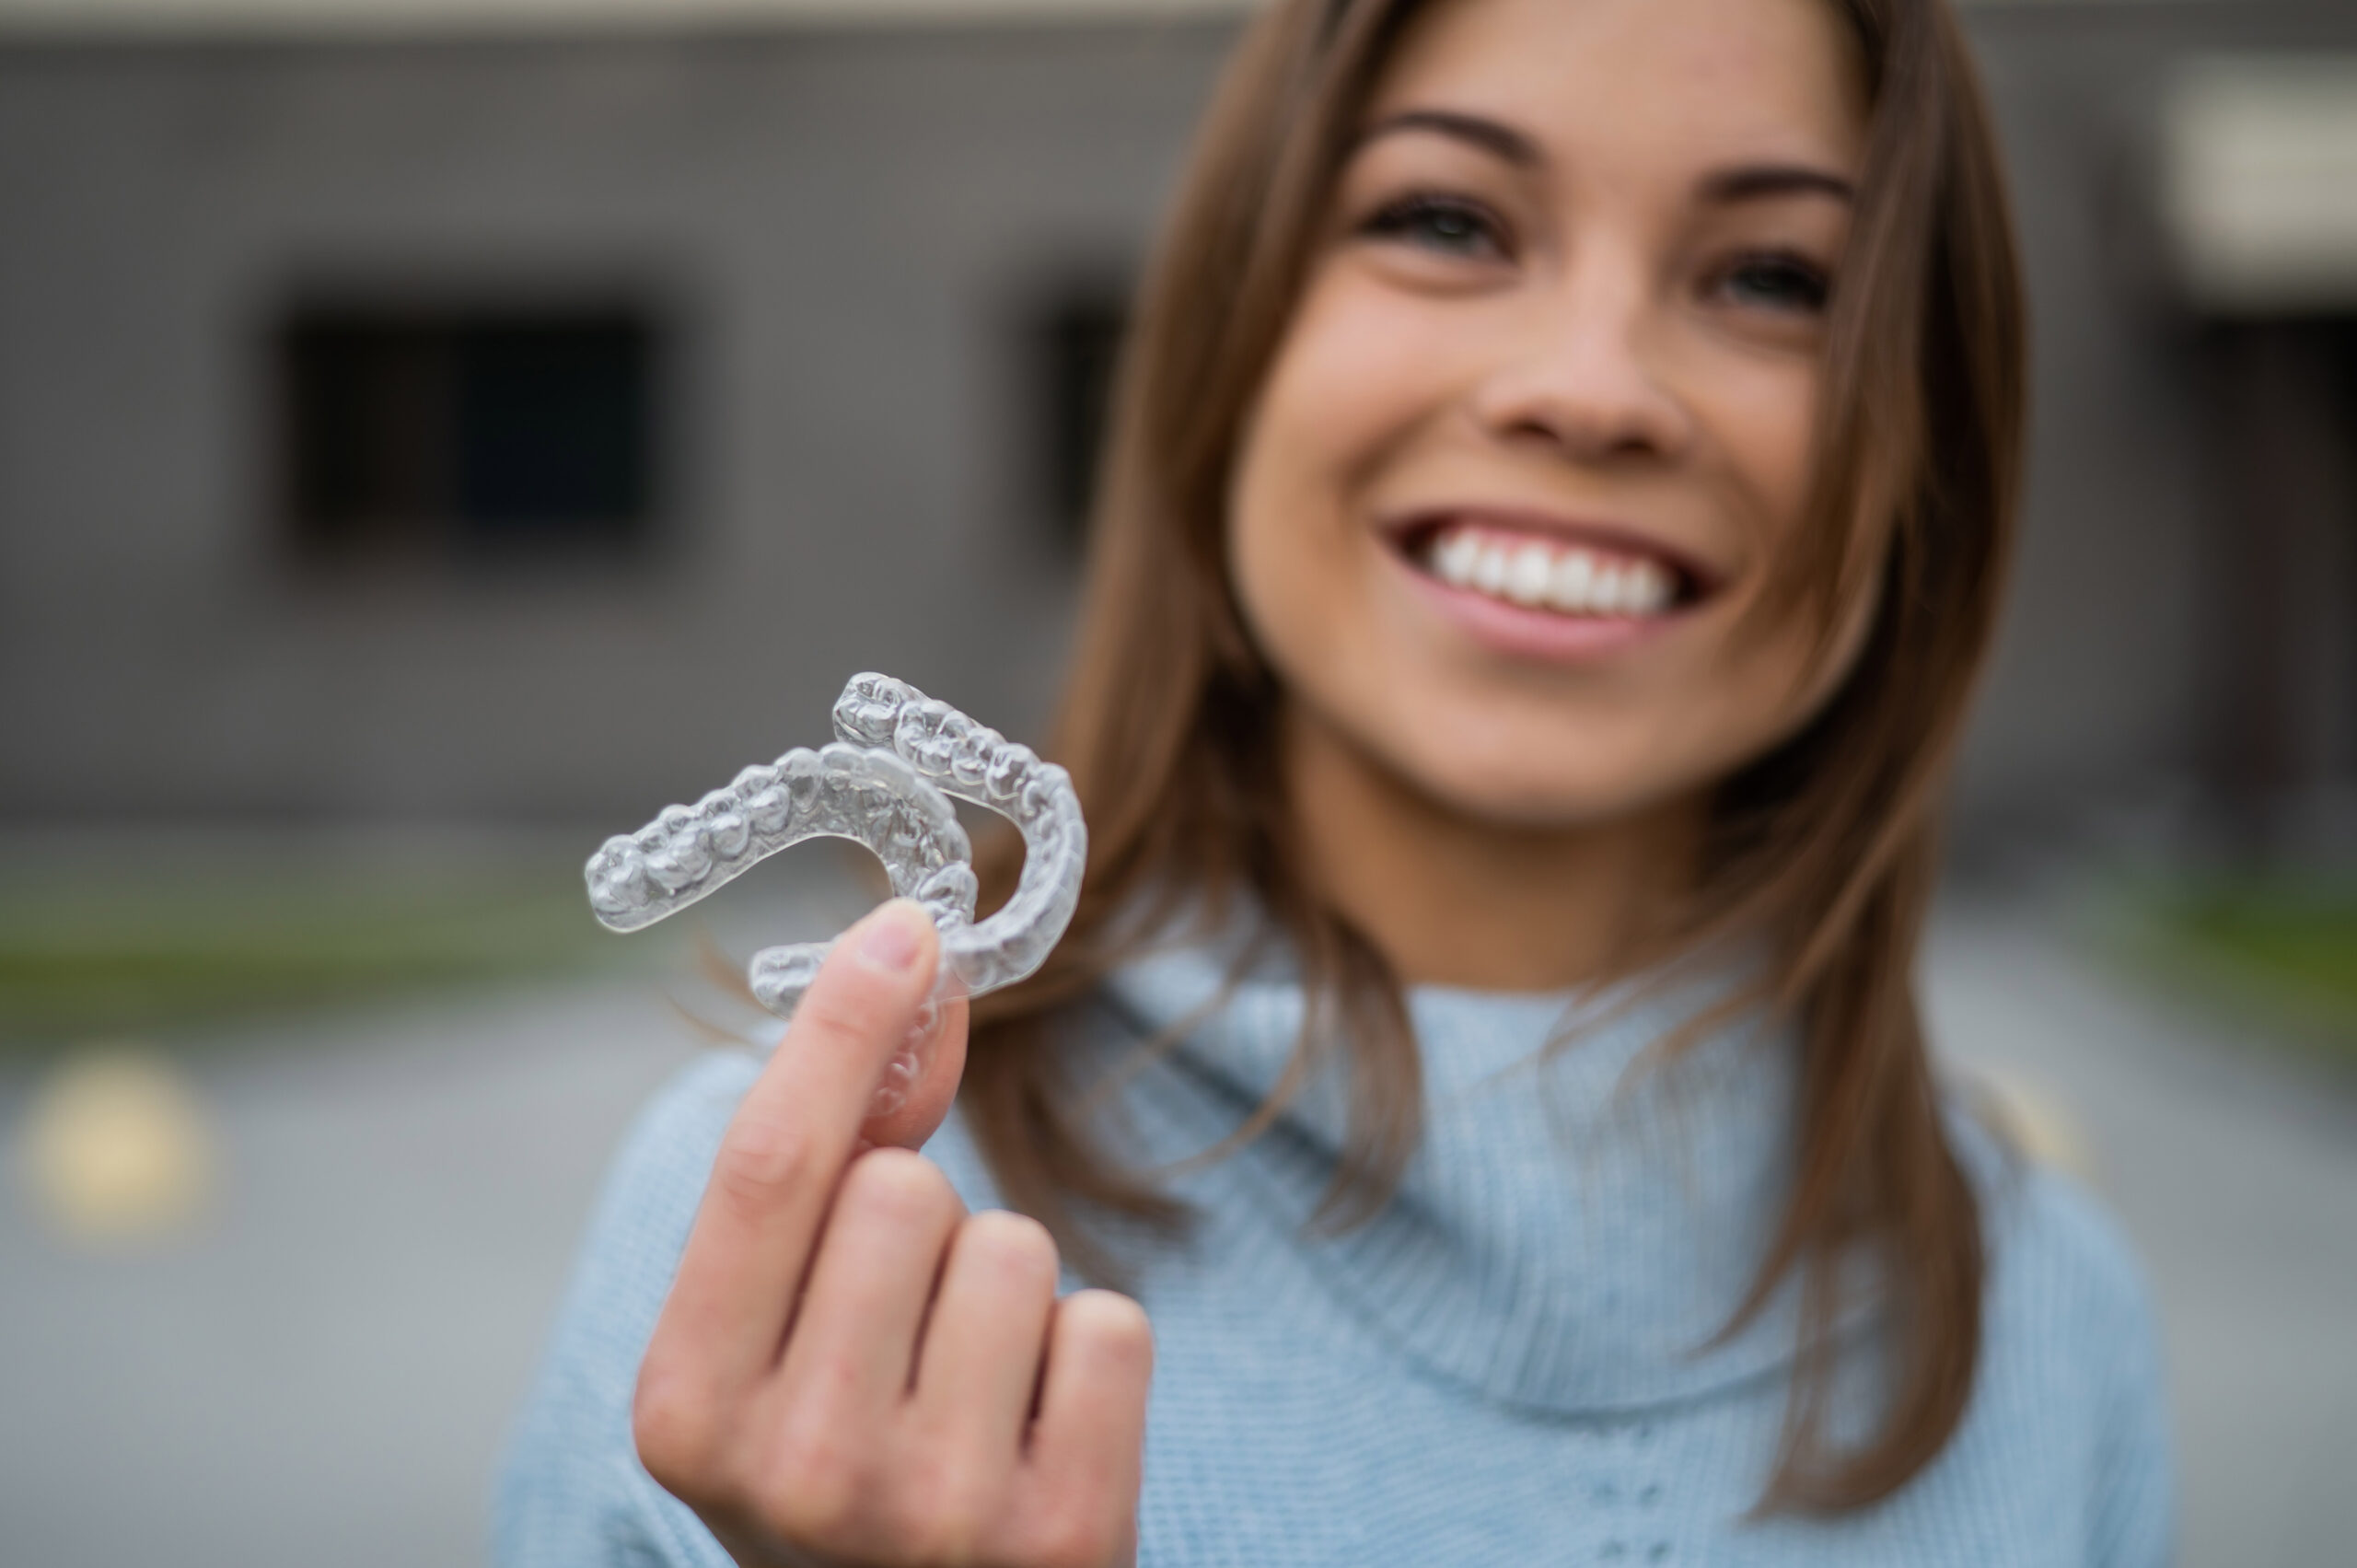 The Top 10 Things to Know About Wearing Your Retainer